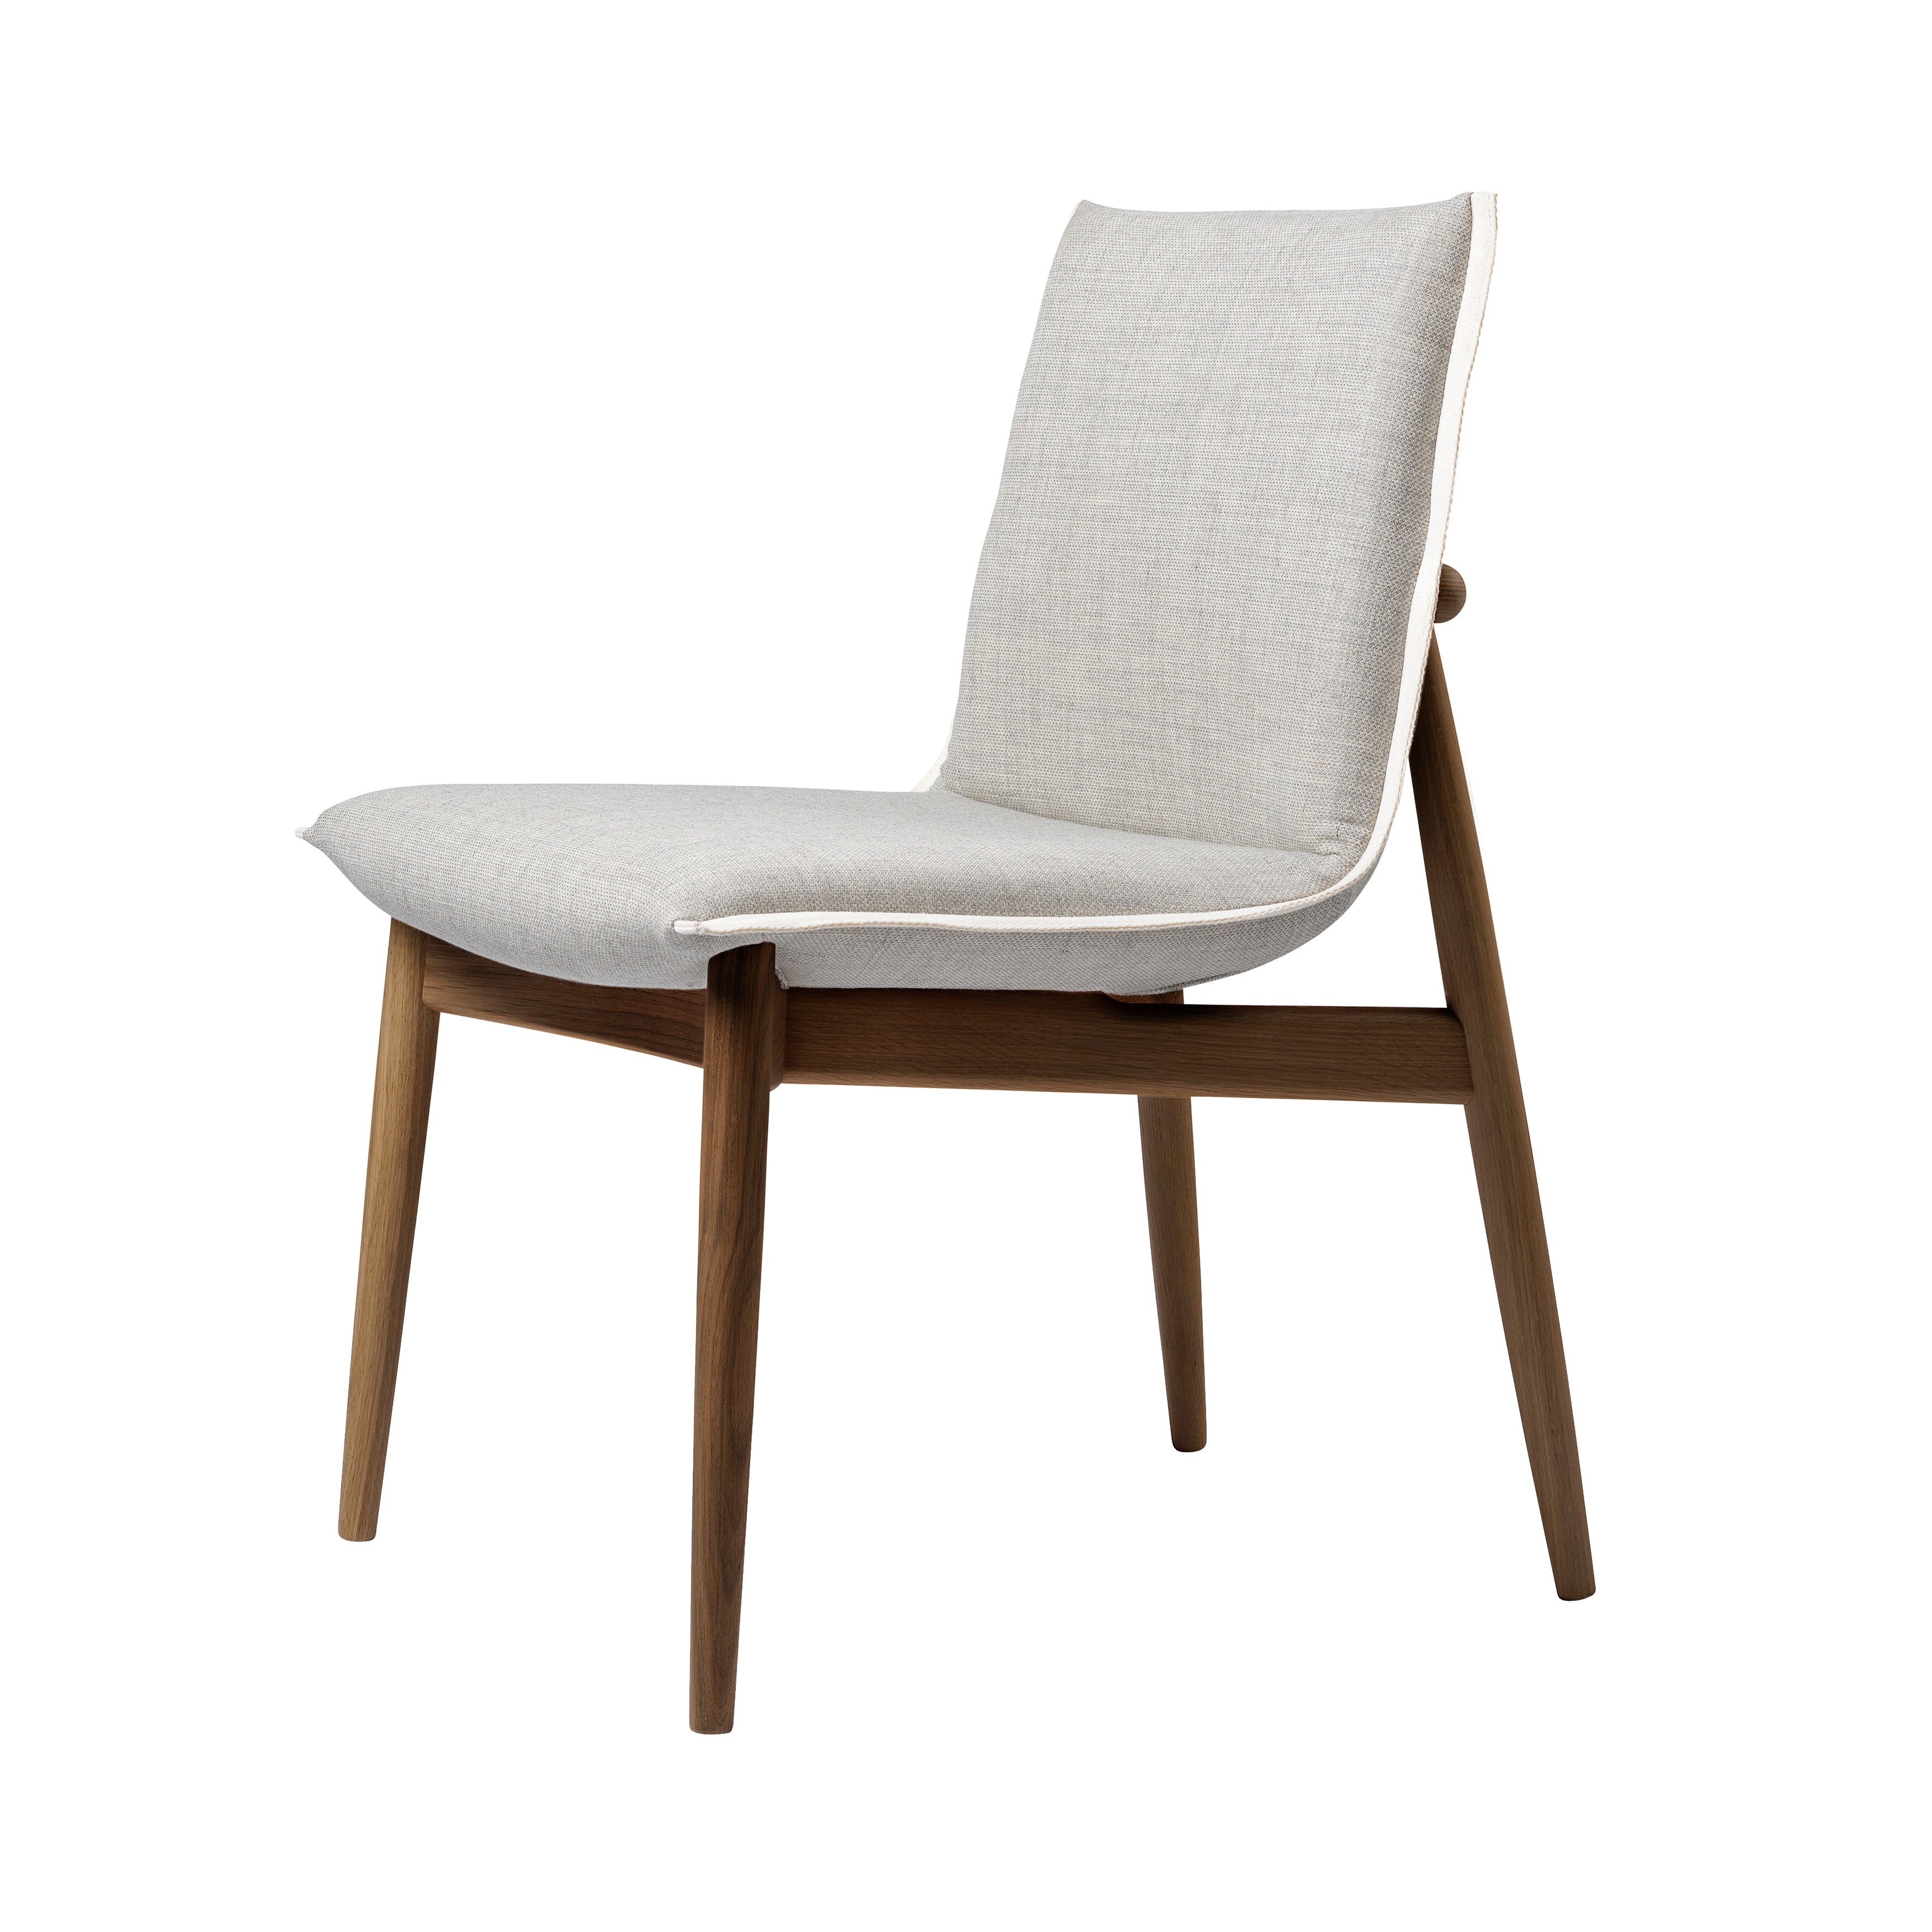 E004 Embrace Chair: Natural Edging Strip + Smoked Oiled Oak